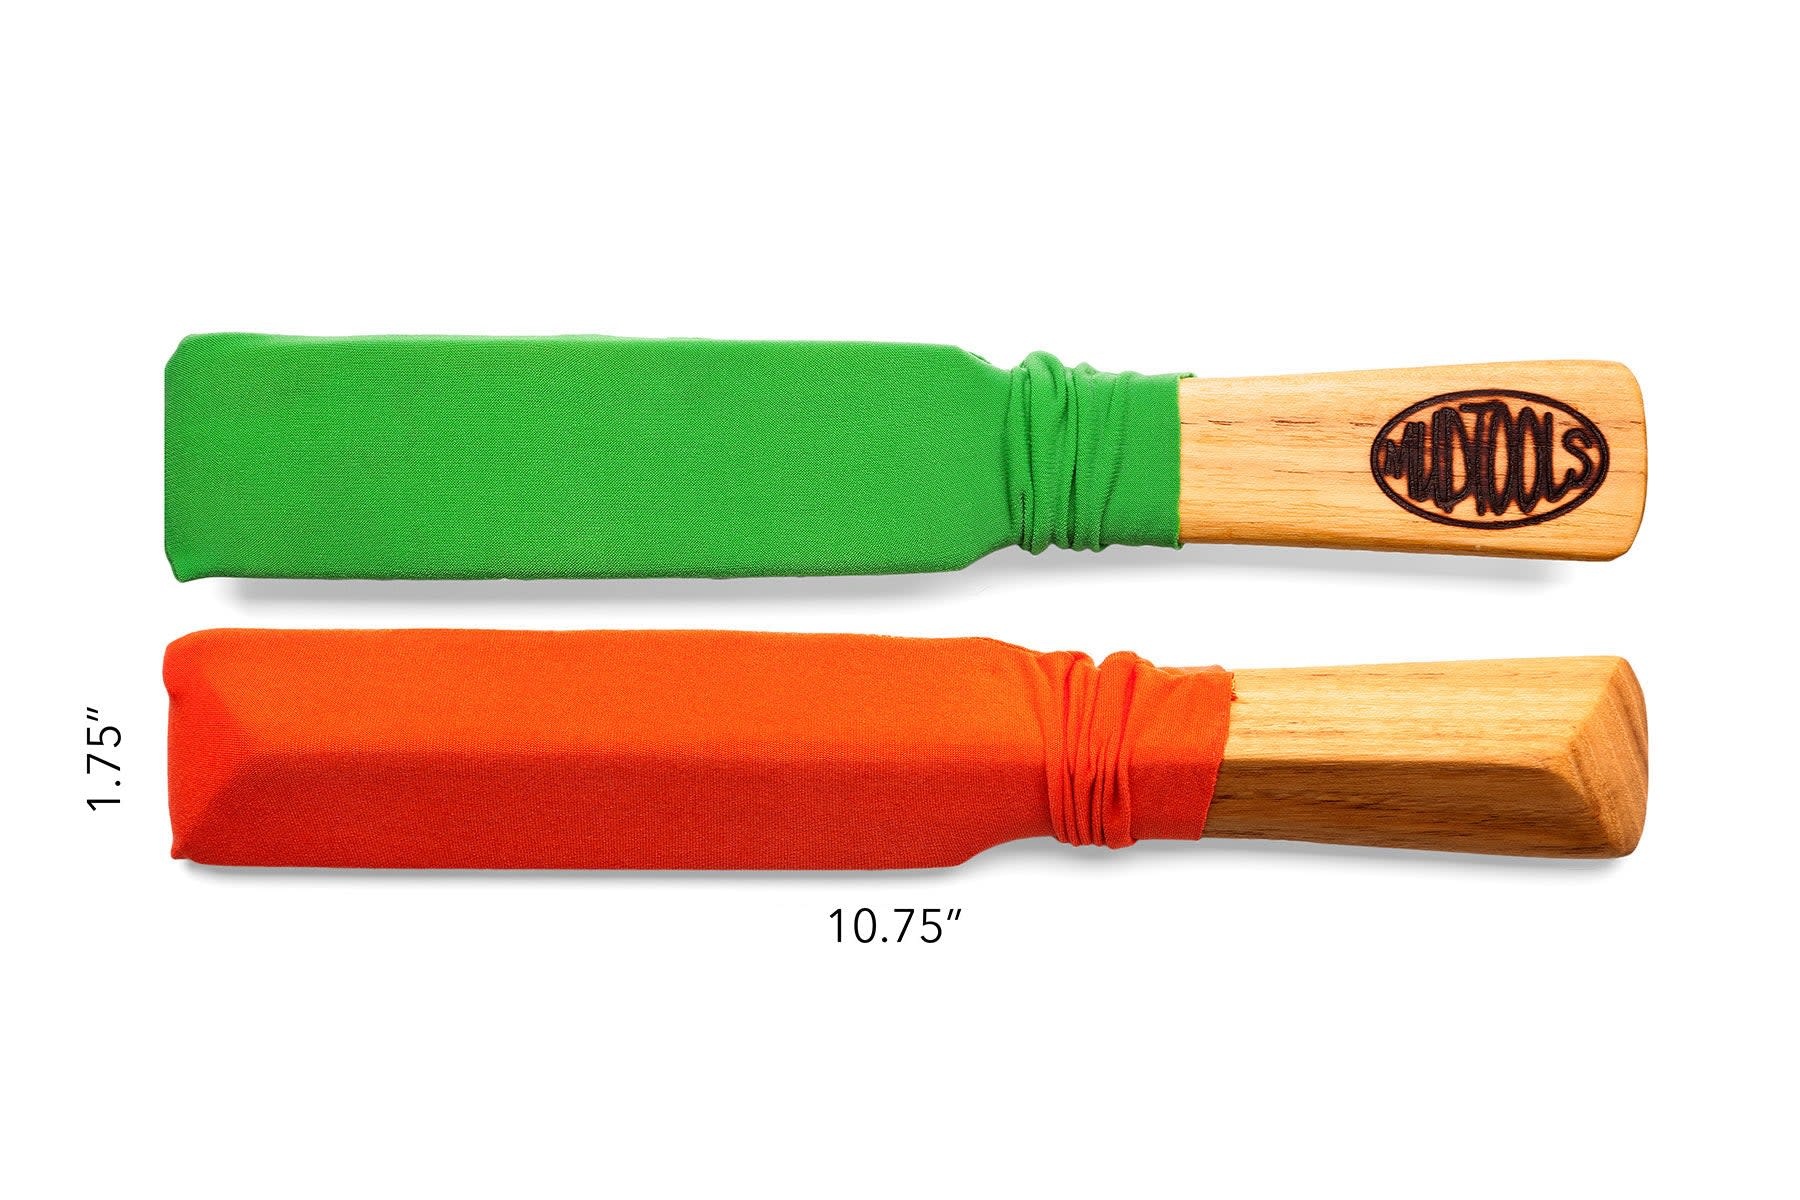 Mudtools Small Paddle with Sleeve